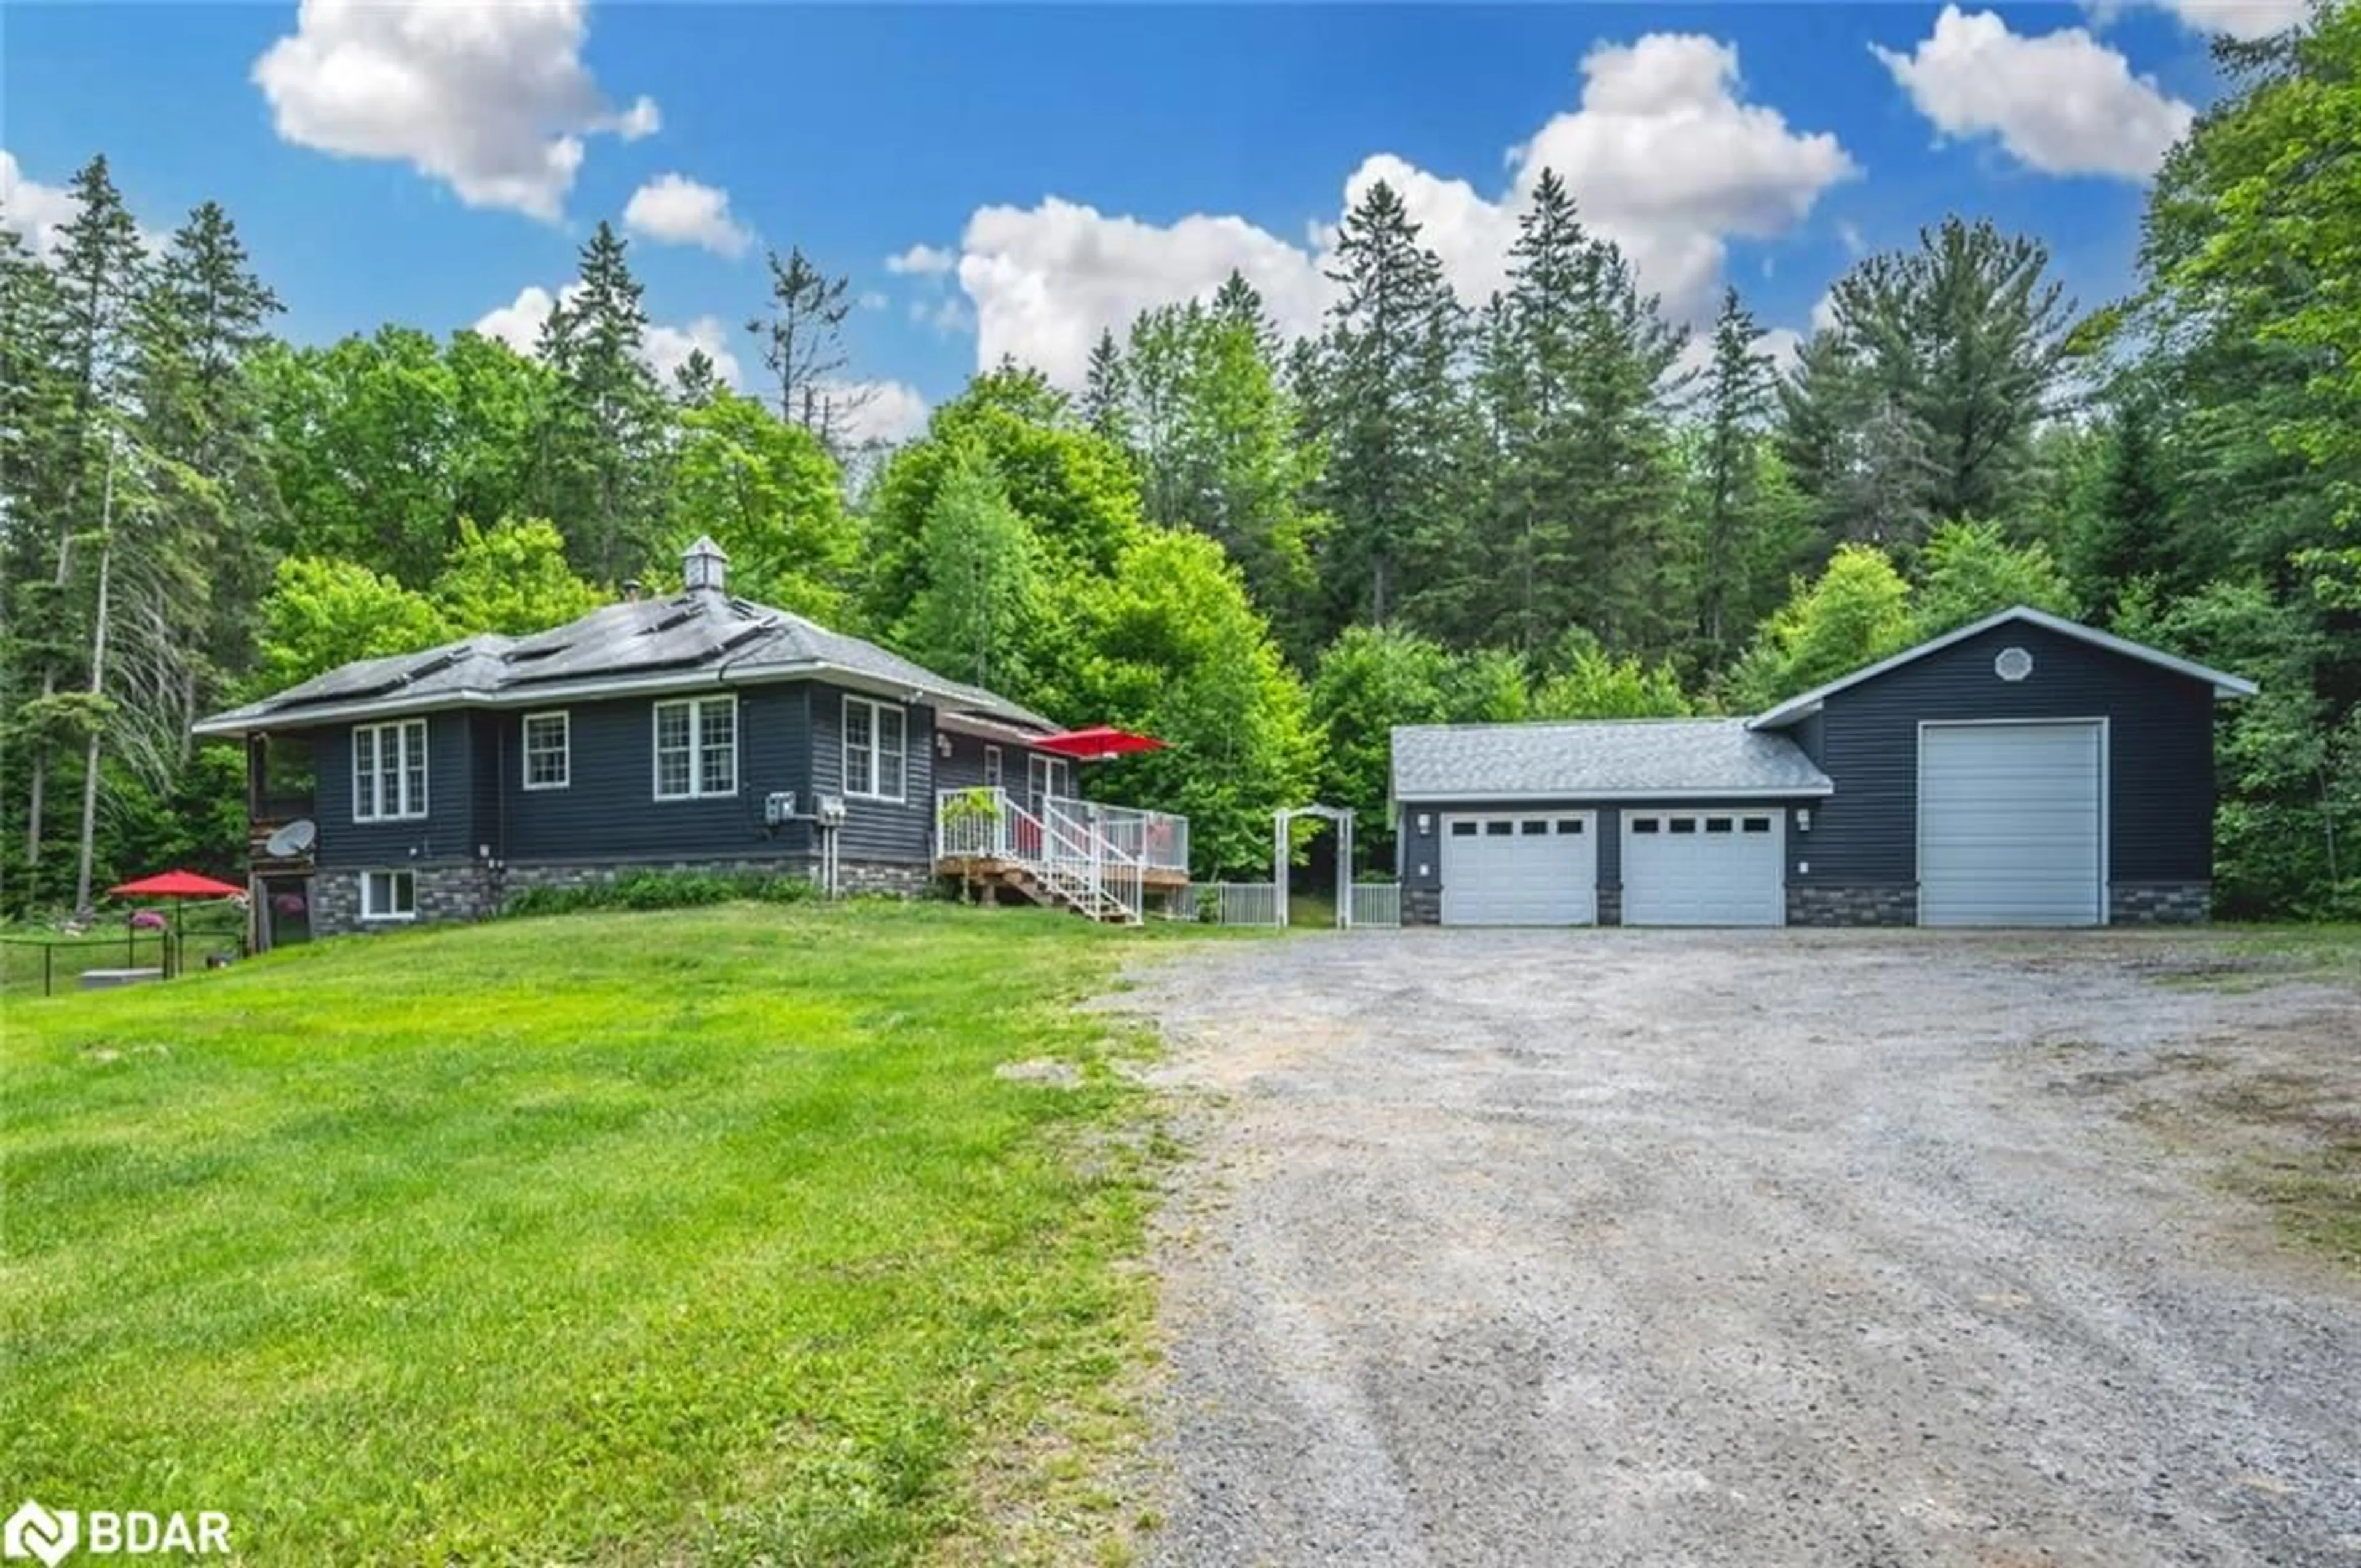 Cottage for 143 South Waseosa Lake Rd, Huntsville Ontario P1H 2N5